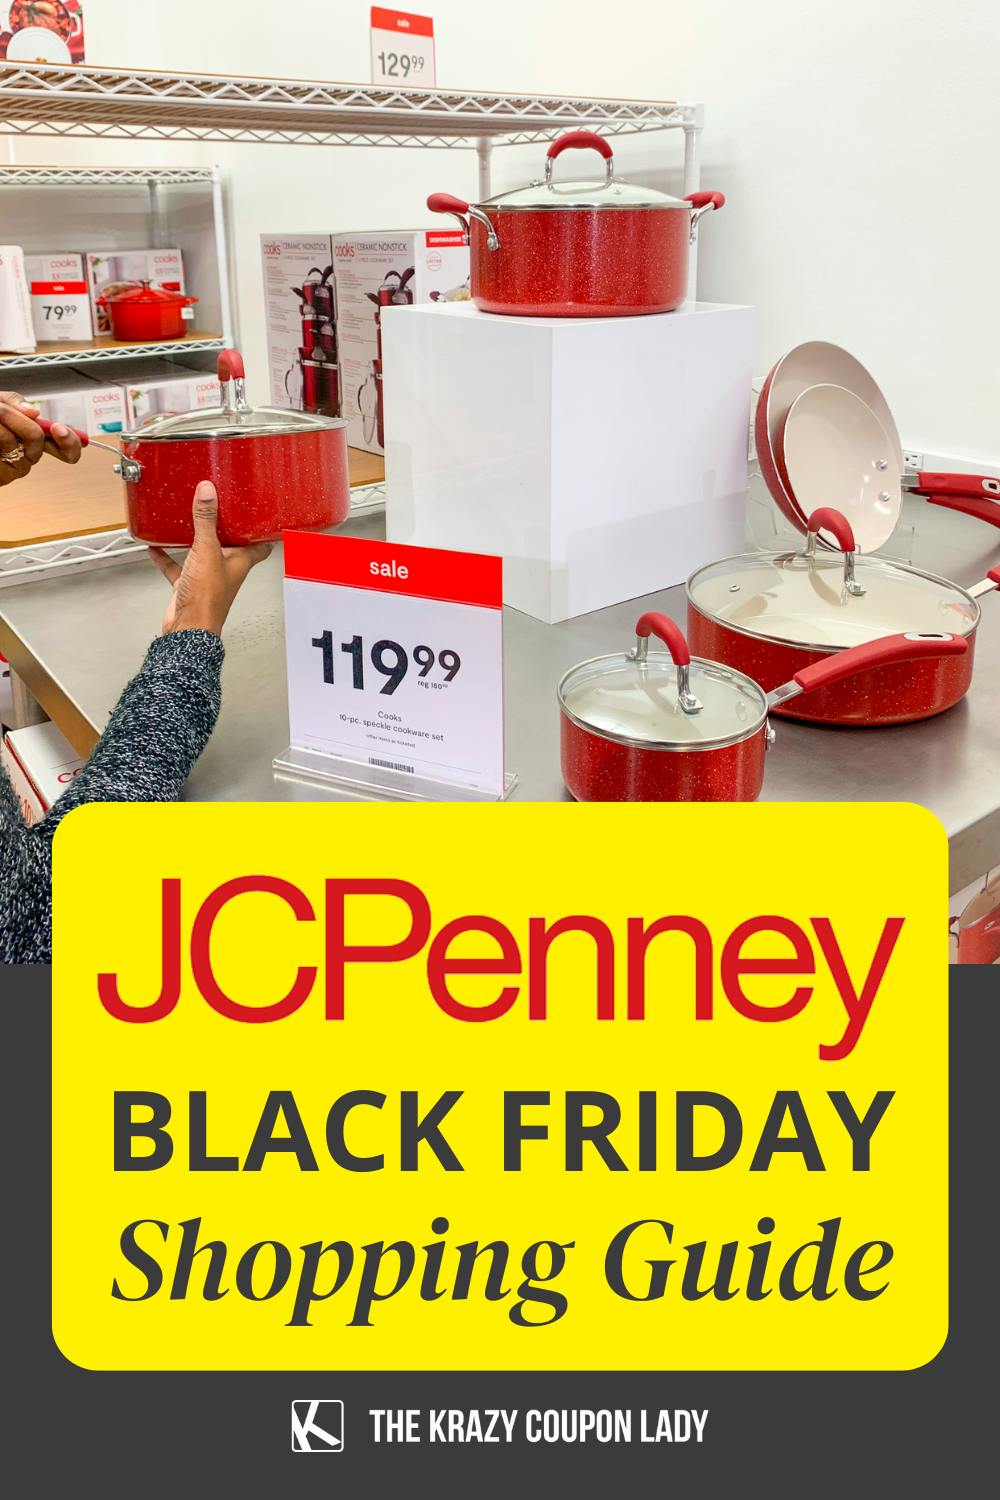 How to Save Up to 80% During the JCPenney Black Friday Sale